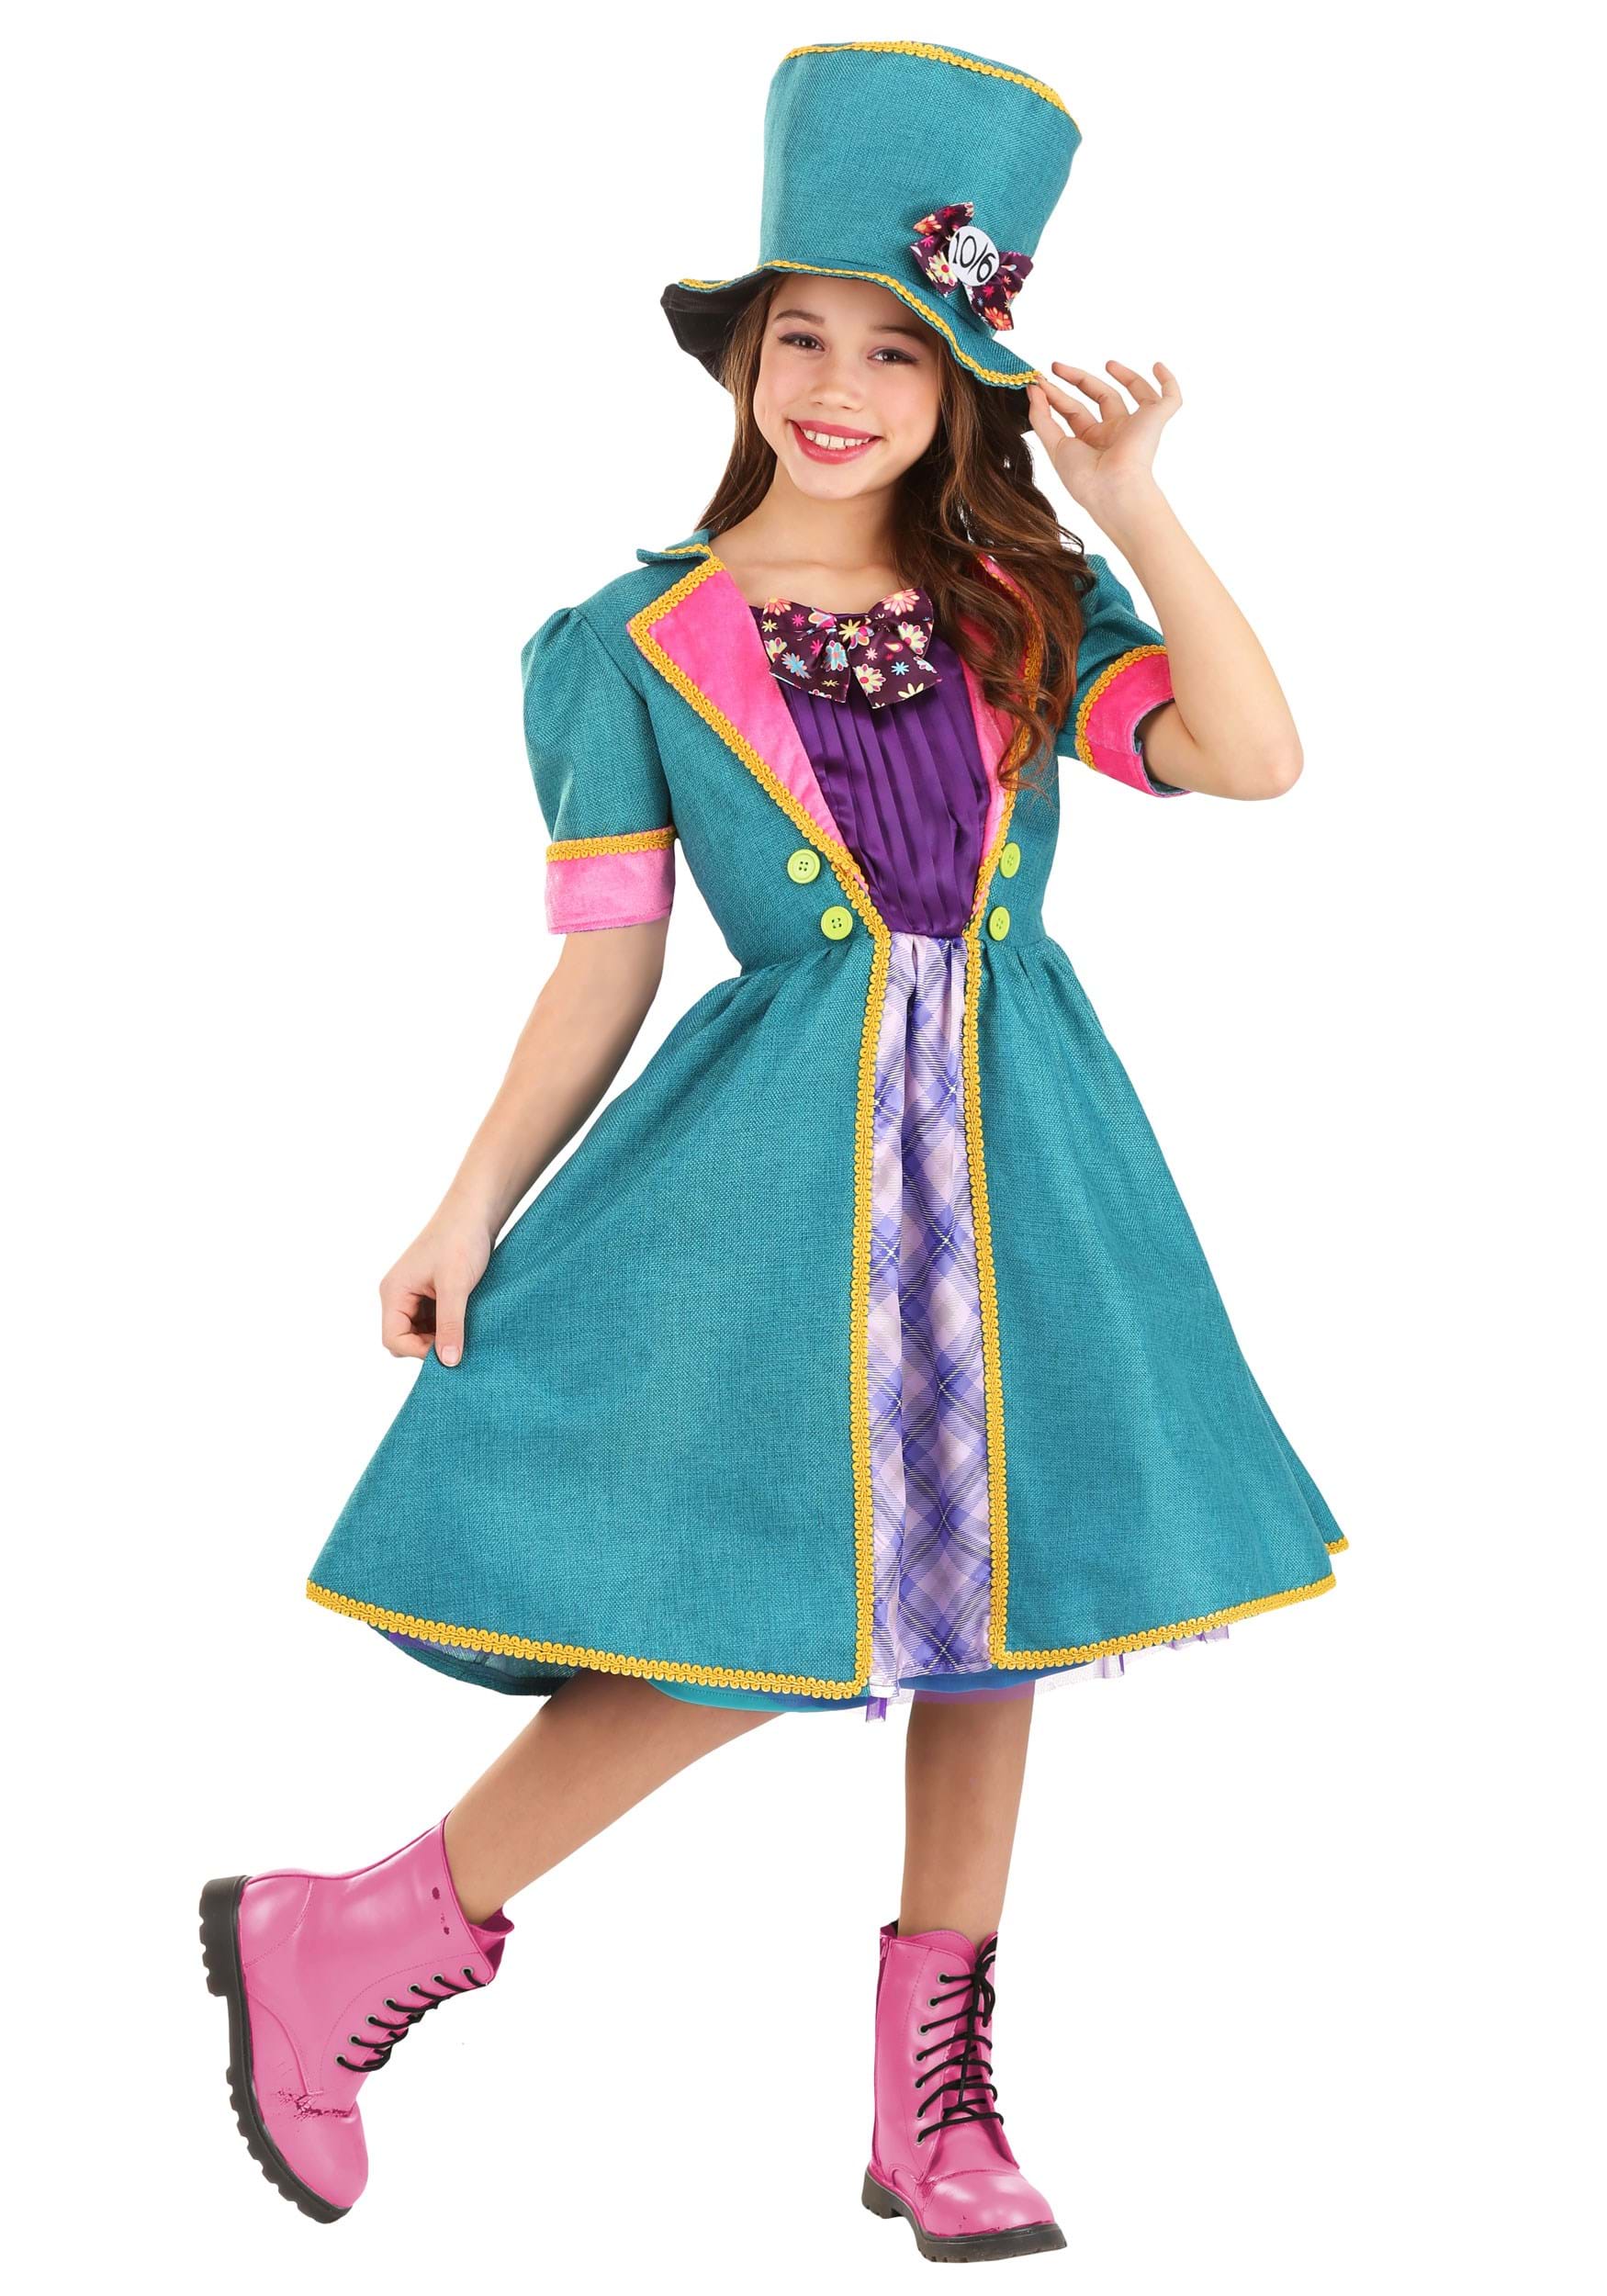 Photos - Fancy Dress Mad Hatter FUN Costumes Mischievous  Costume for Girl's Pink/Purple/ 